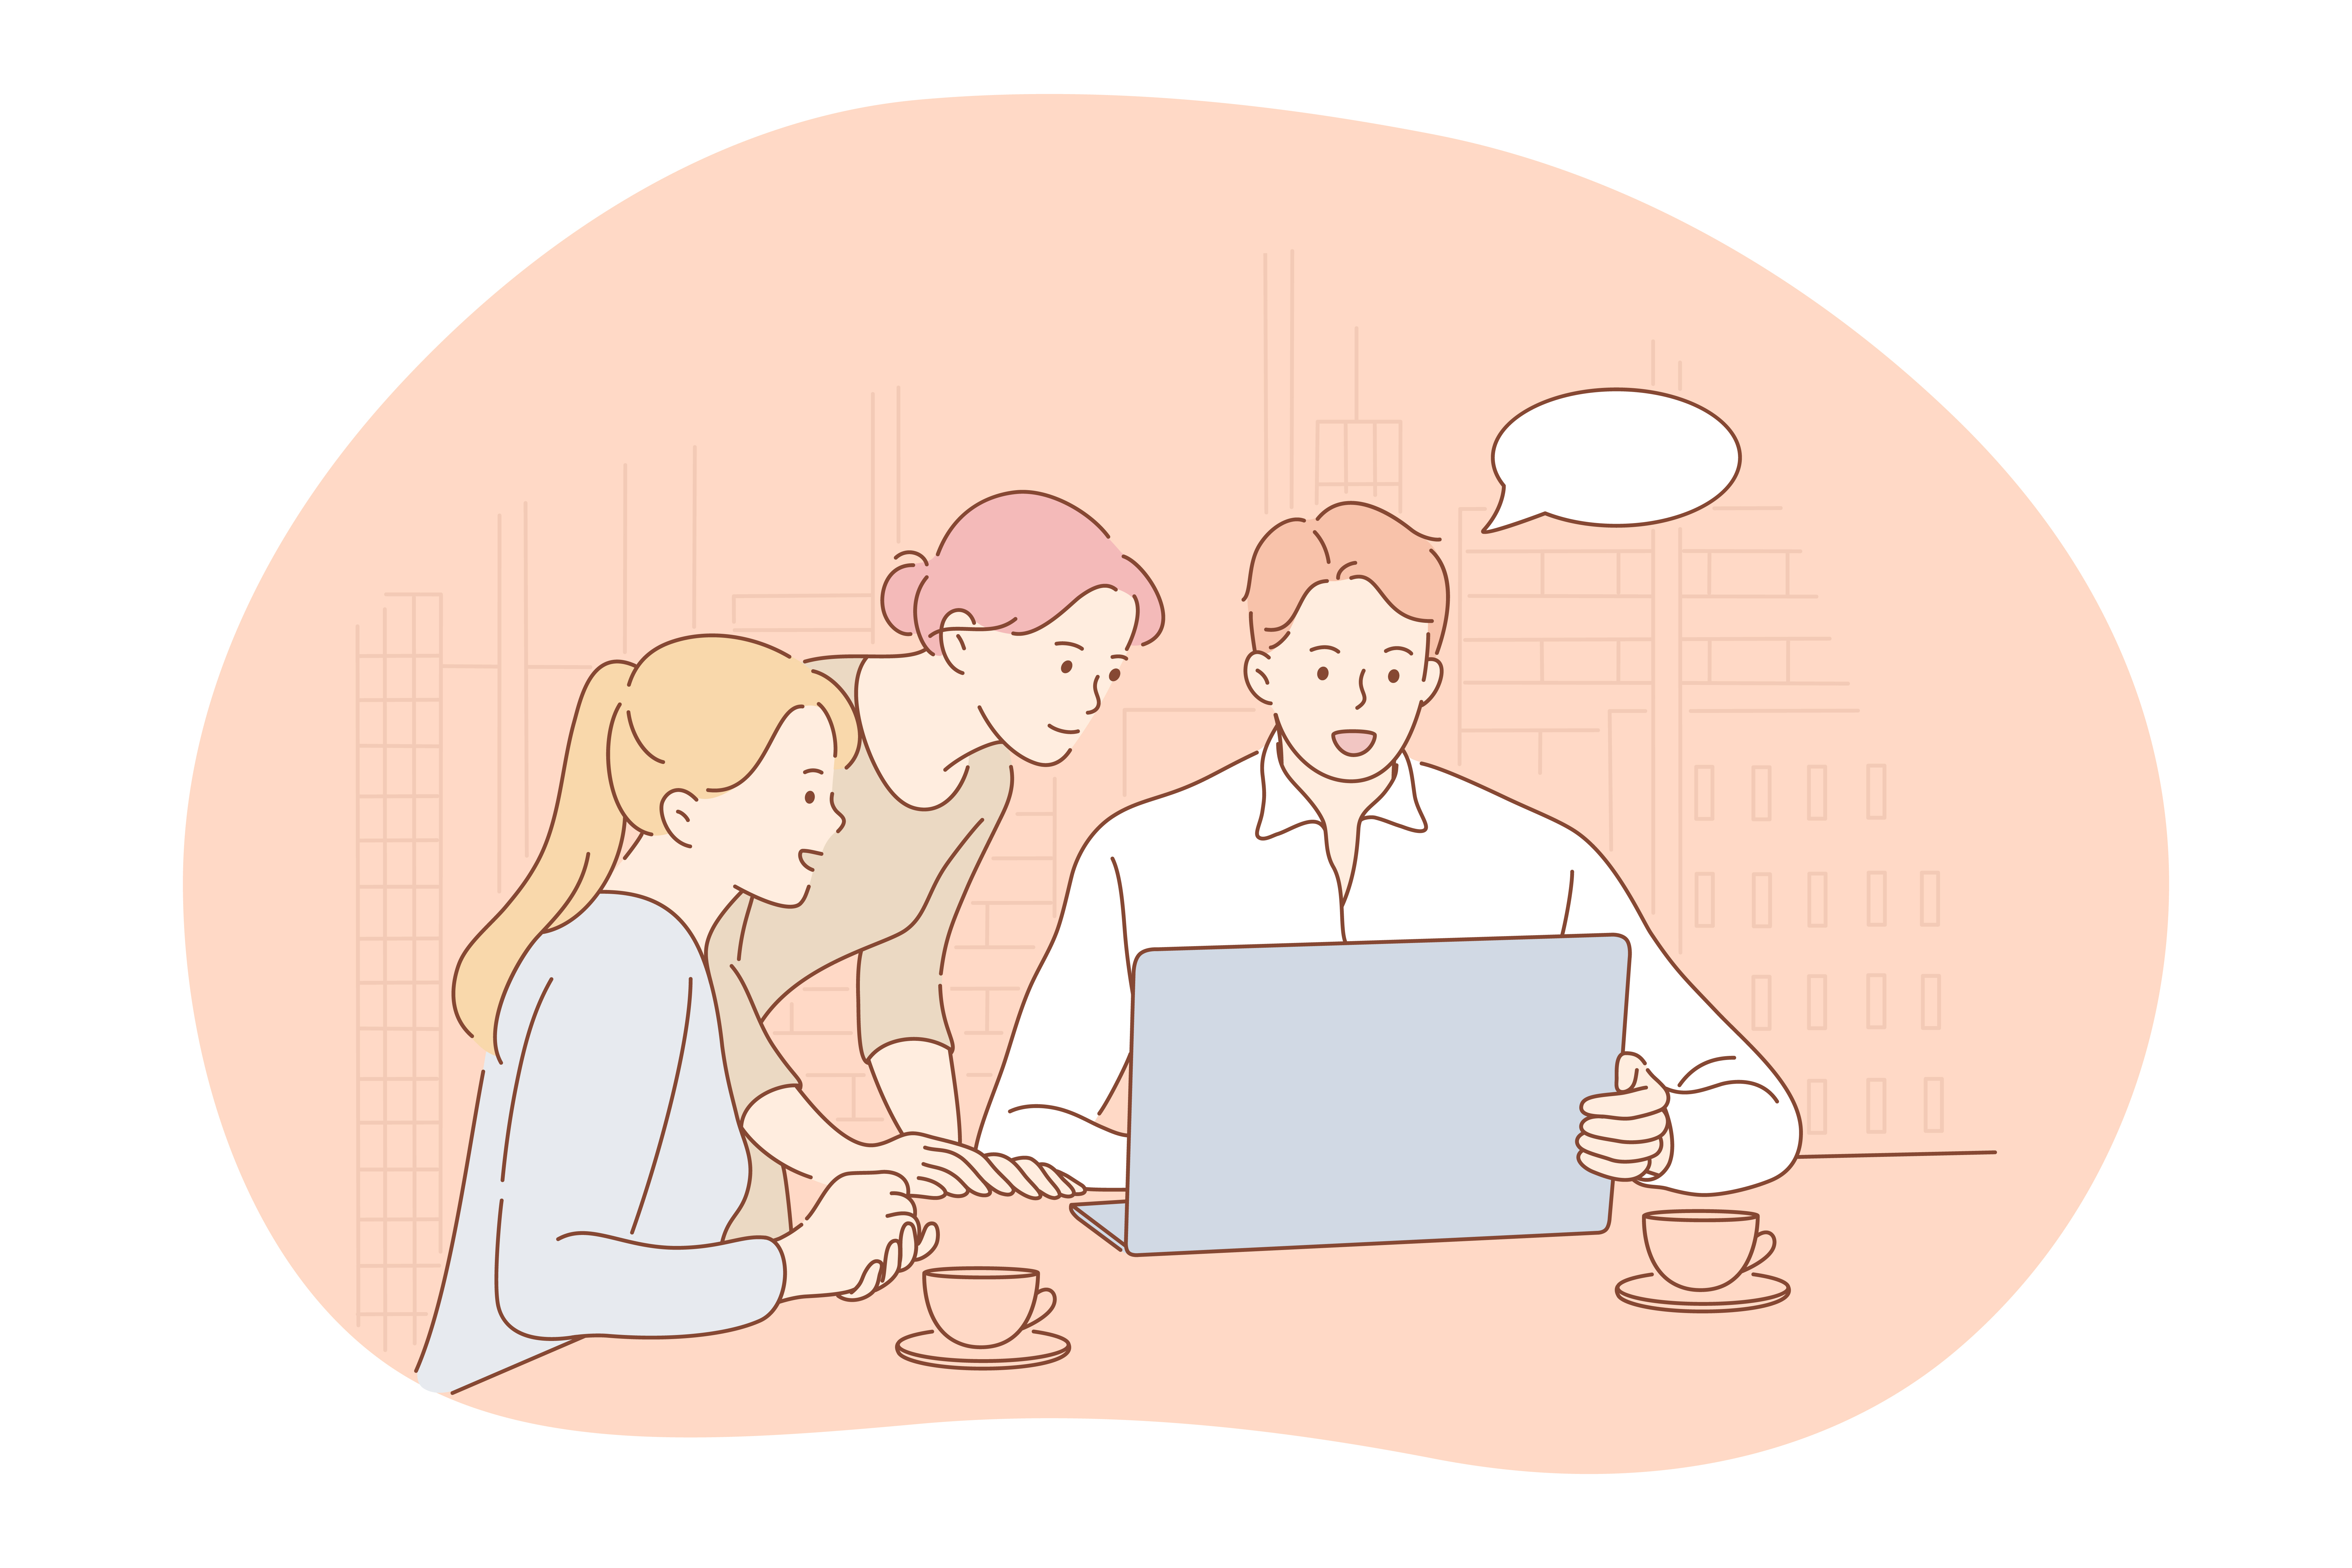 Teamwork, brainstorming, business communication about startup concept. Group of young positive business people coworkers cartoon characters making presentation on laptop and discussing project . Teamwork, brainstorming, business communication about startup concept